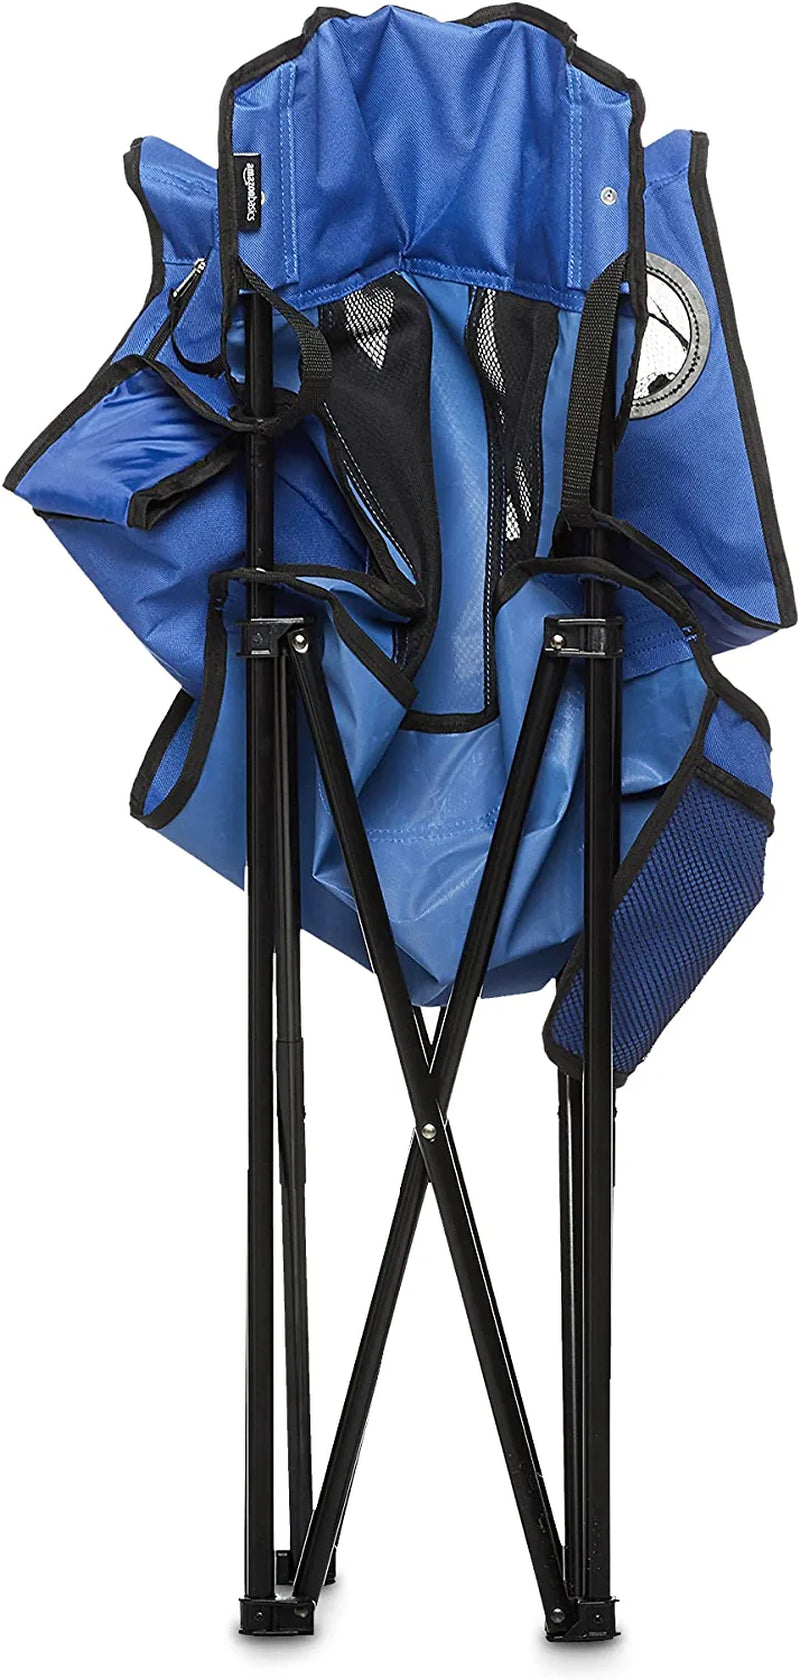 Folding Mesh-Back Outdoor Camping Chair with Carrying Bag - 34 X 20 X 36 Inches, Blue